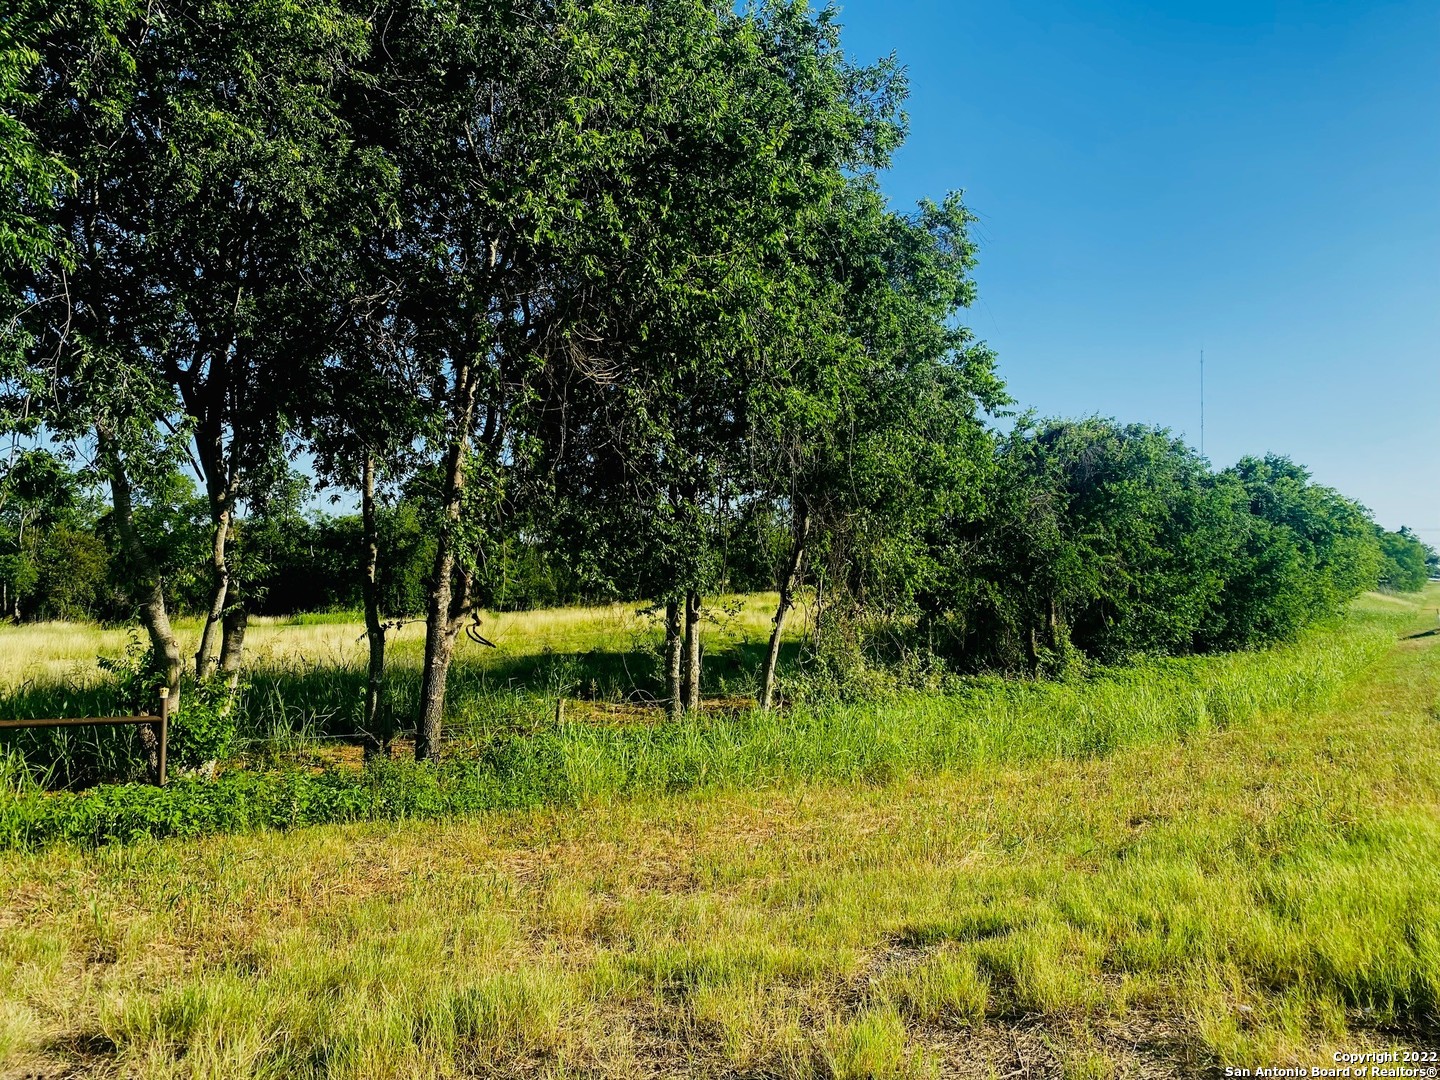 Great commercial Opportunity. Approximately 1500'. In Southeast San Antonio, near Stuart Rd. and Calaveras Lake.